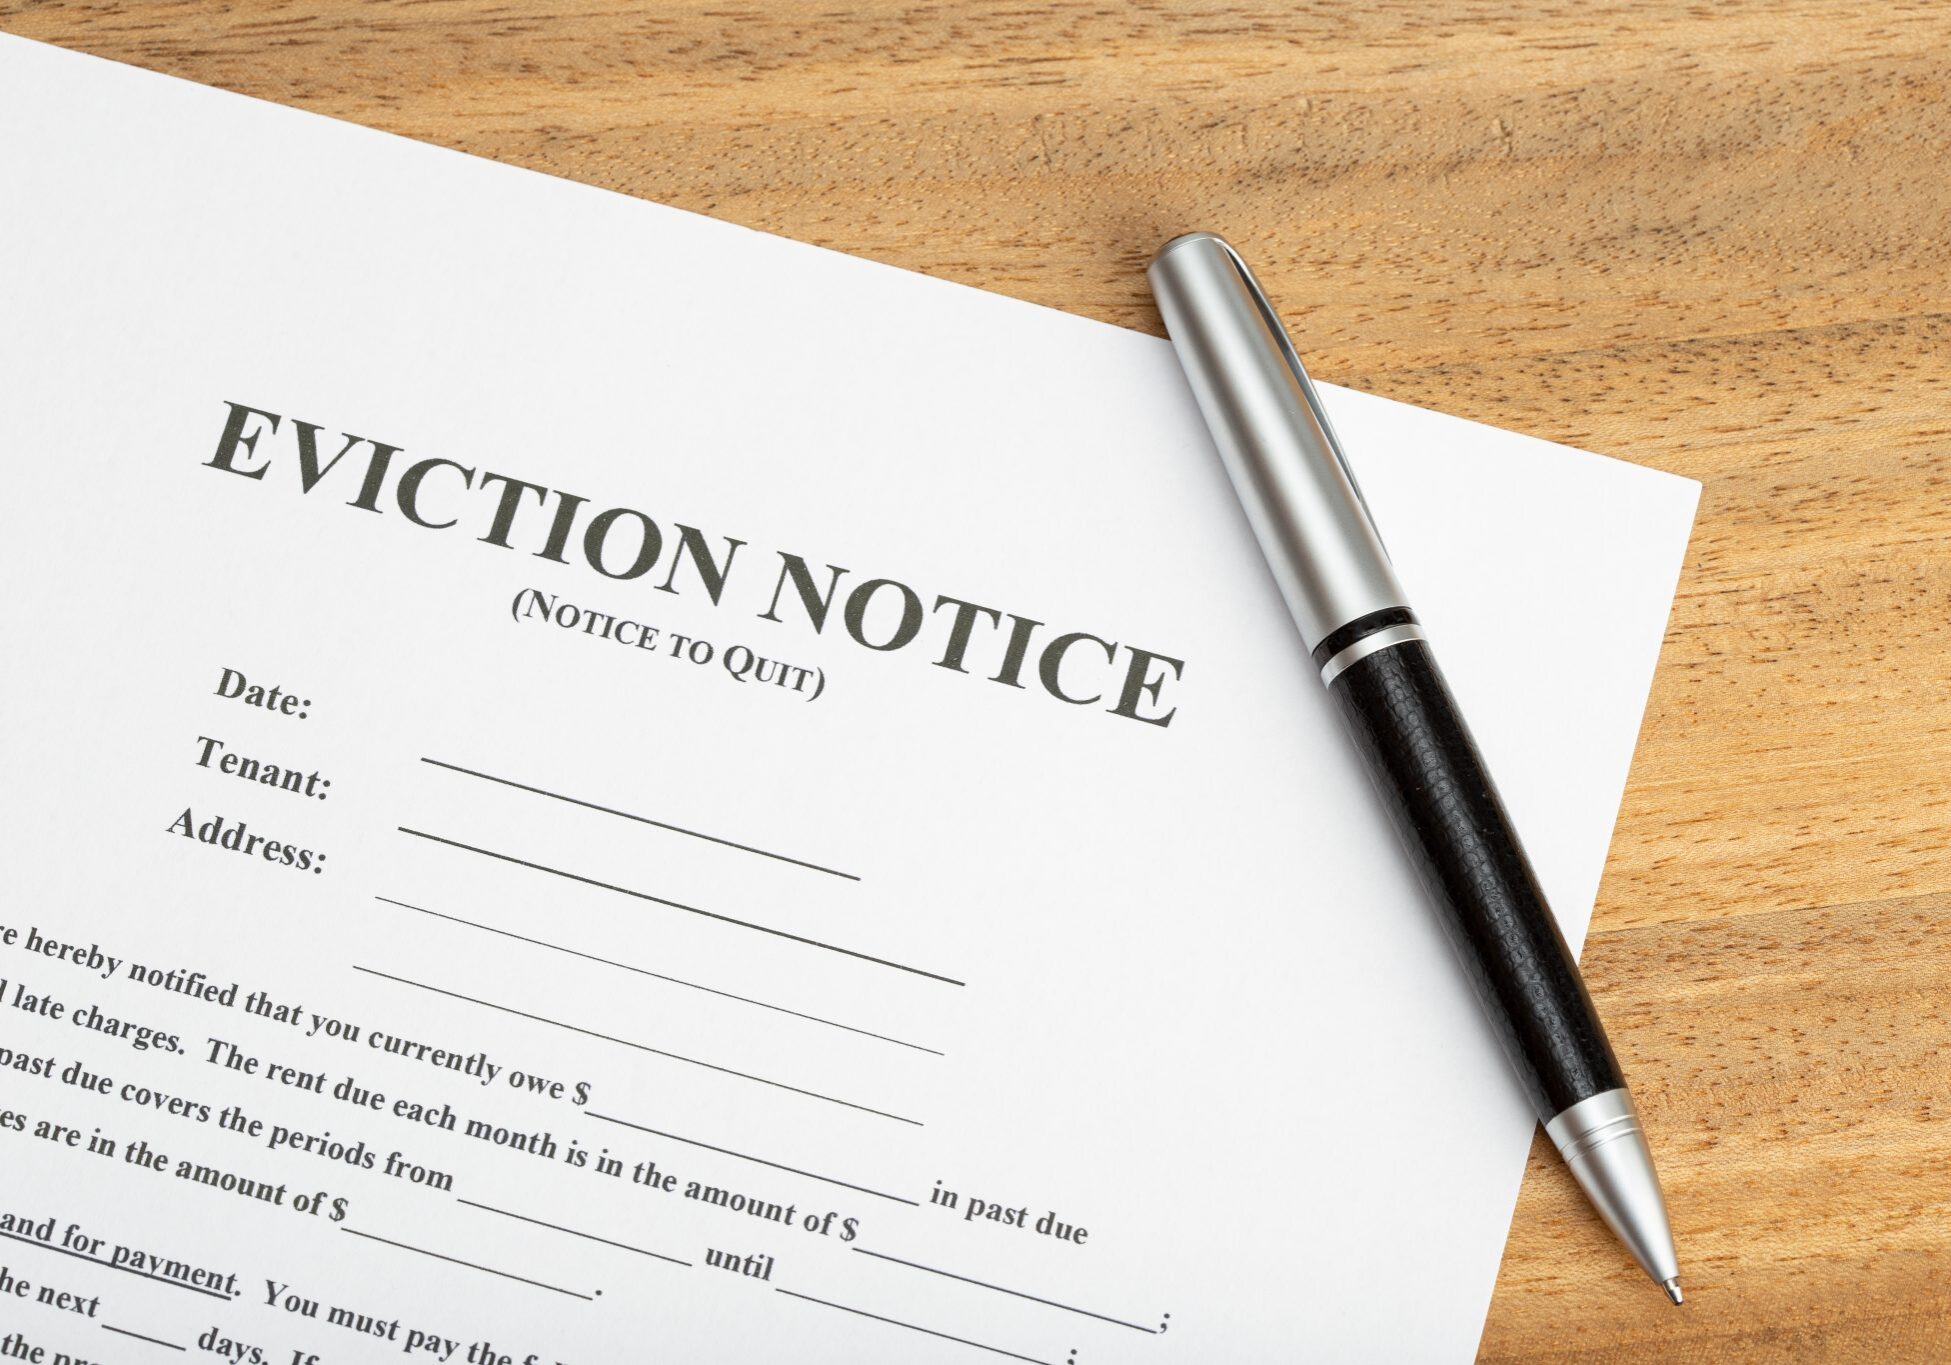 Eviction Notice Document on table